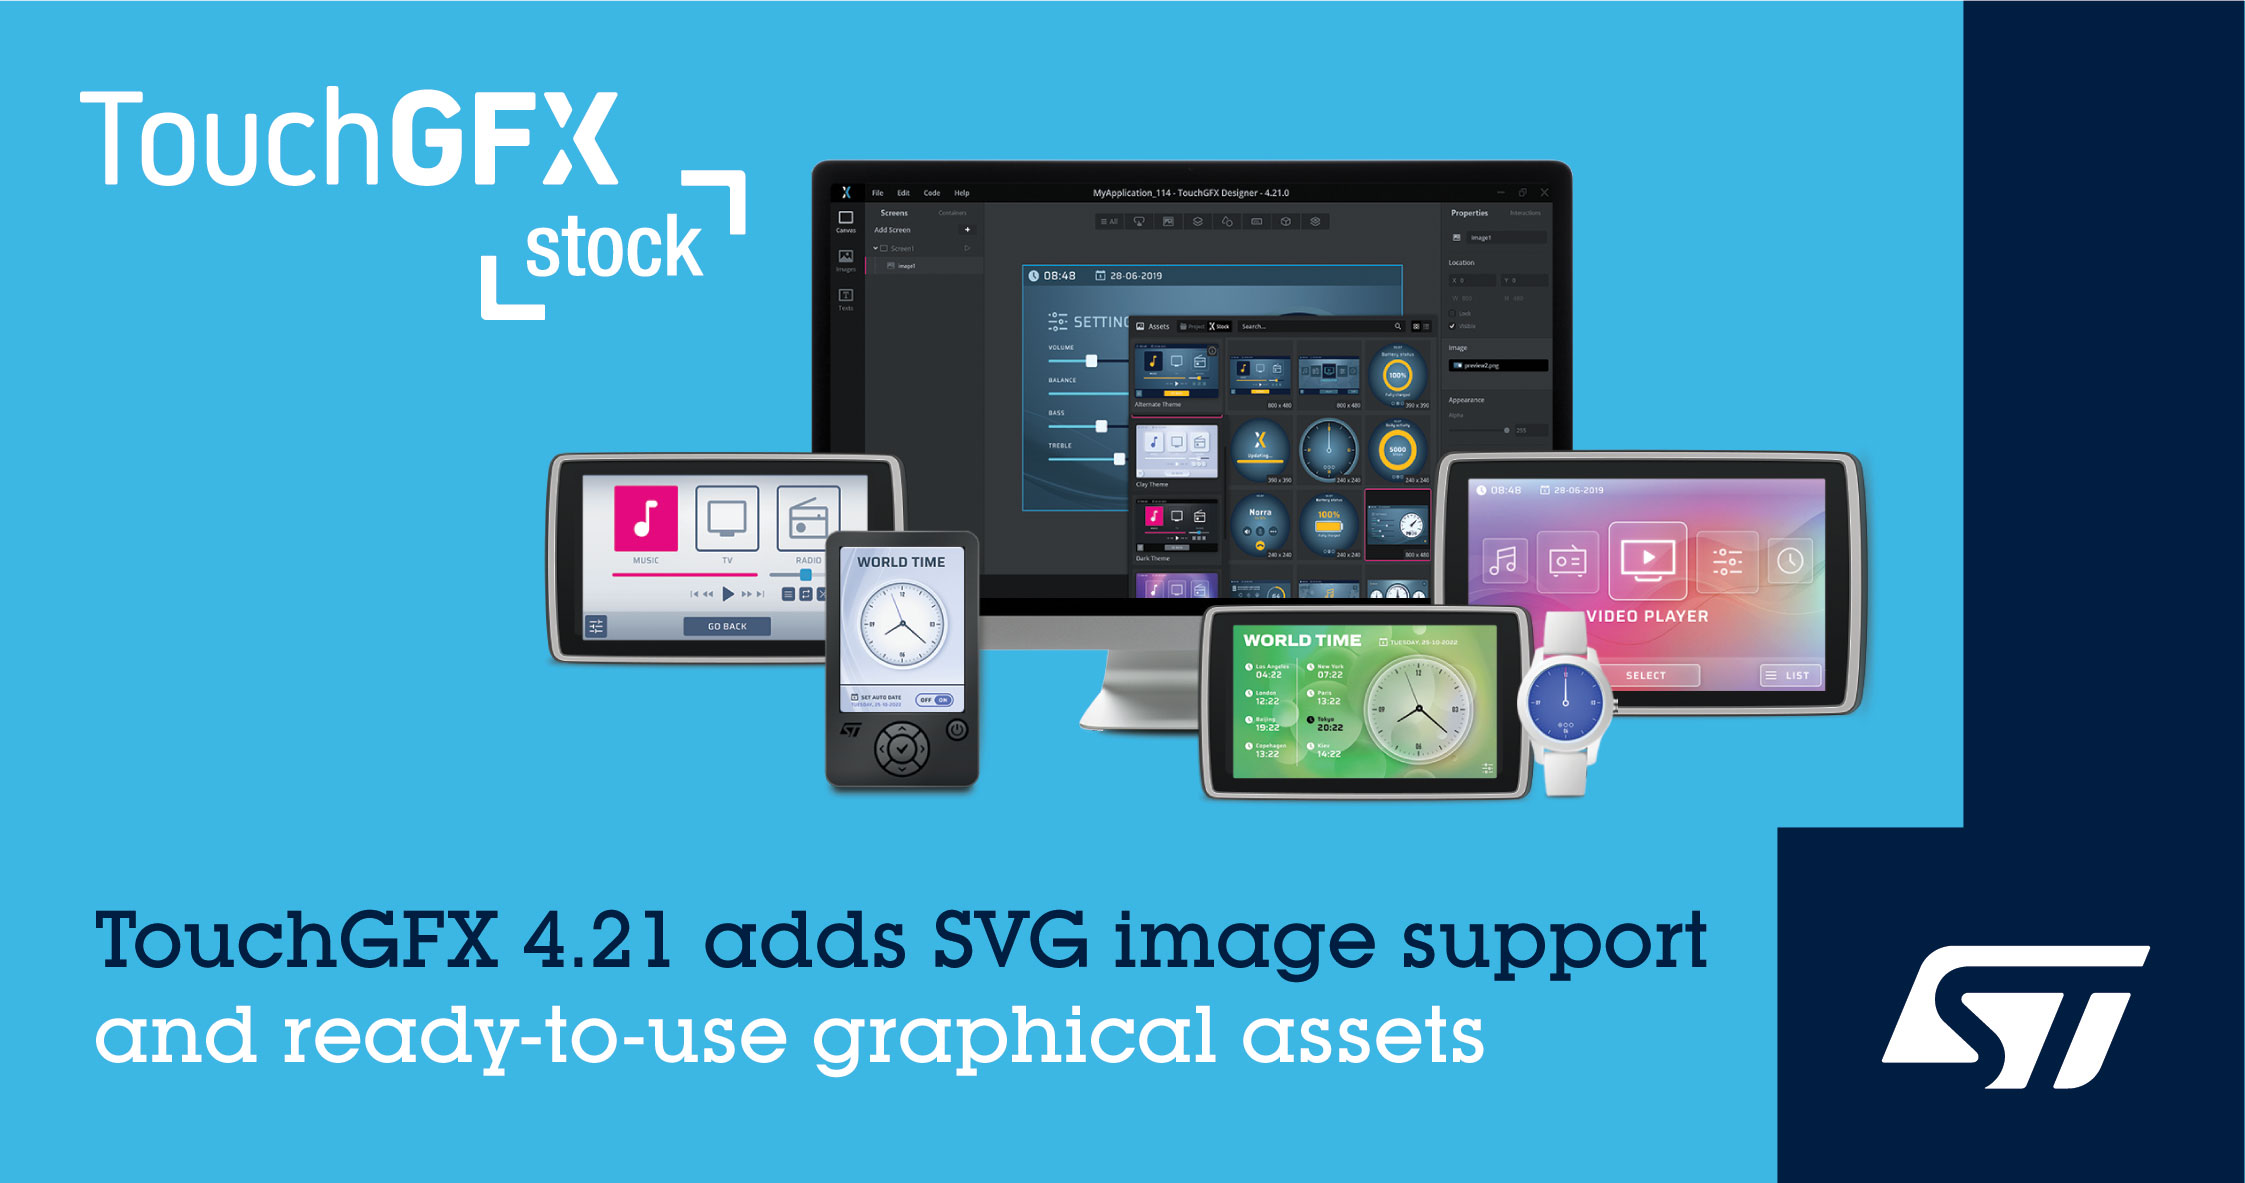 STMicroelectronics Eases and Accelerates User-Interface Design on STM32 MCUs with new TouchGFX Stock